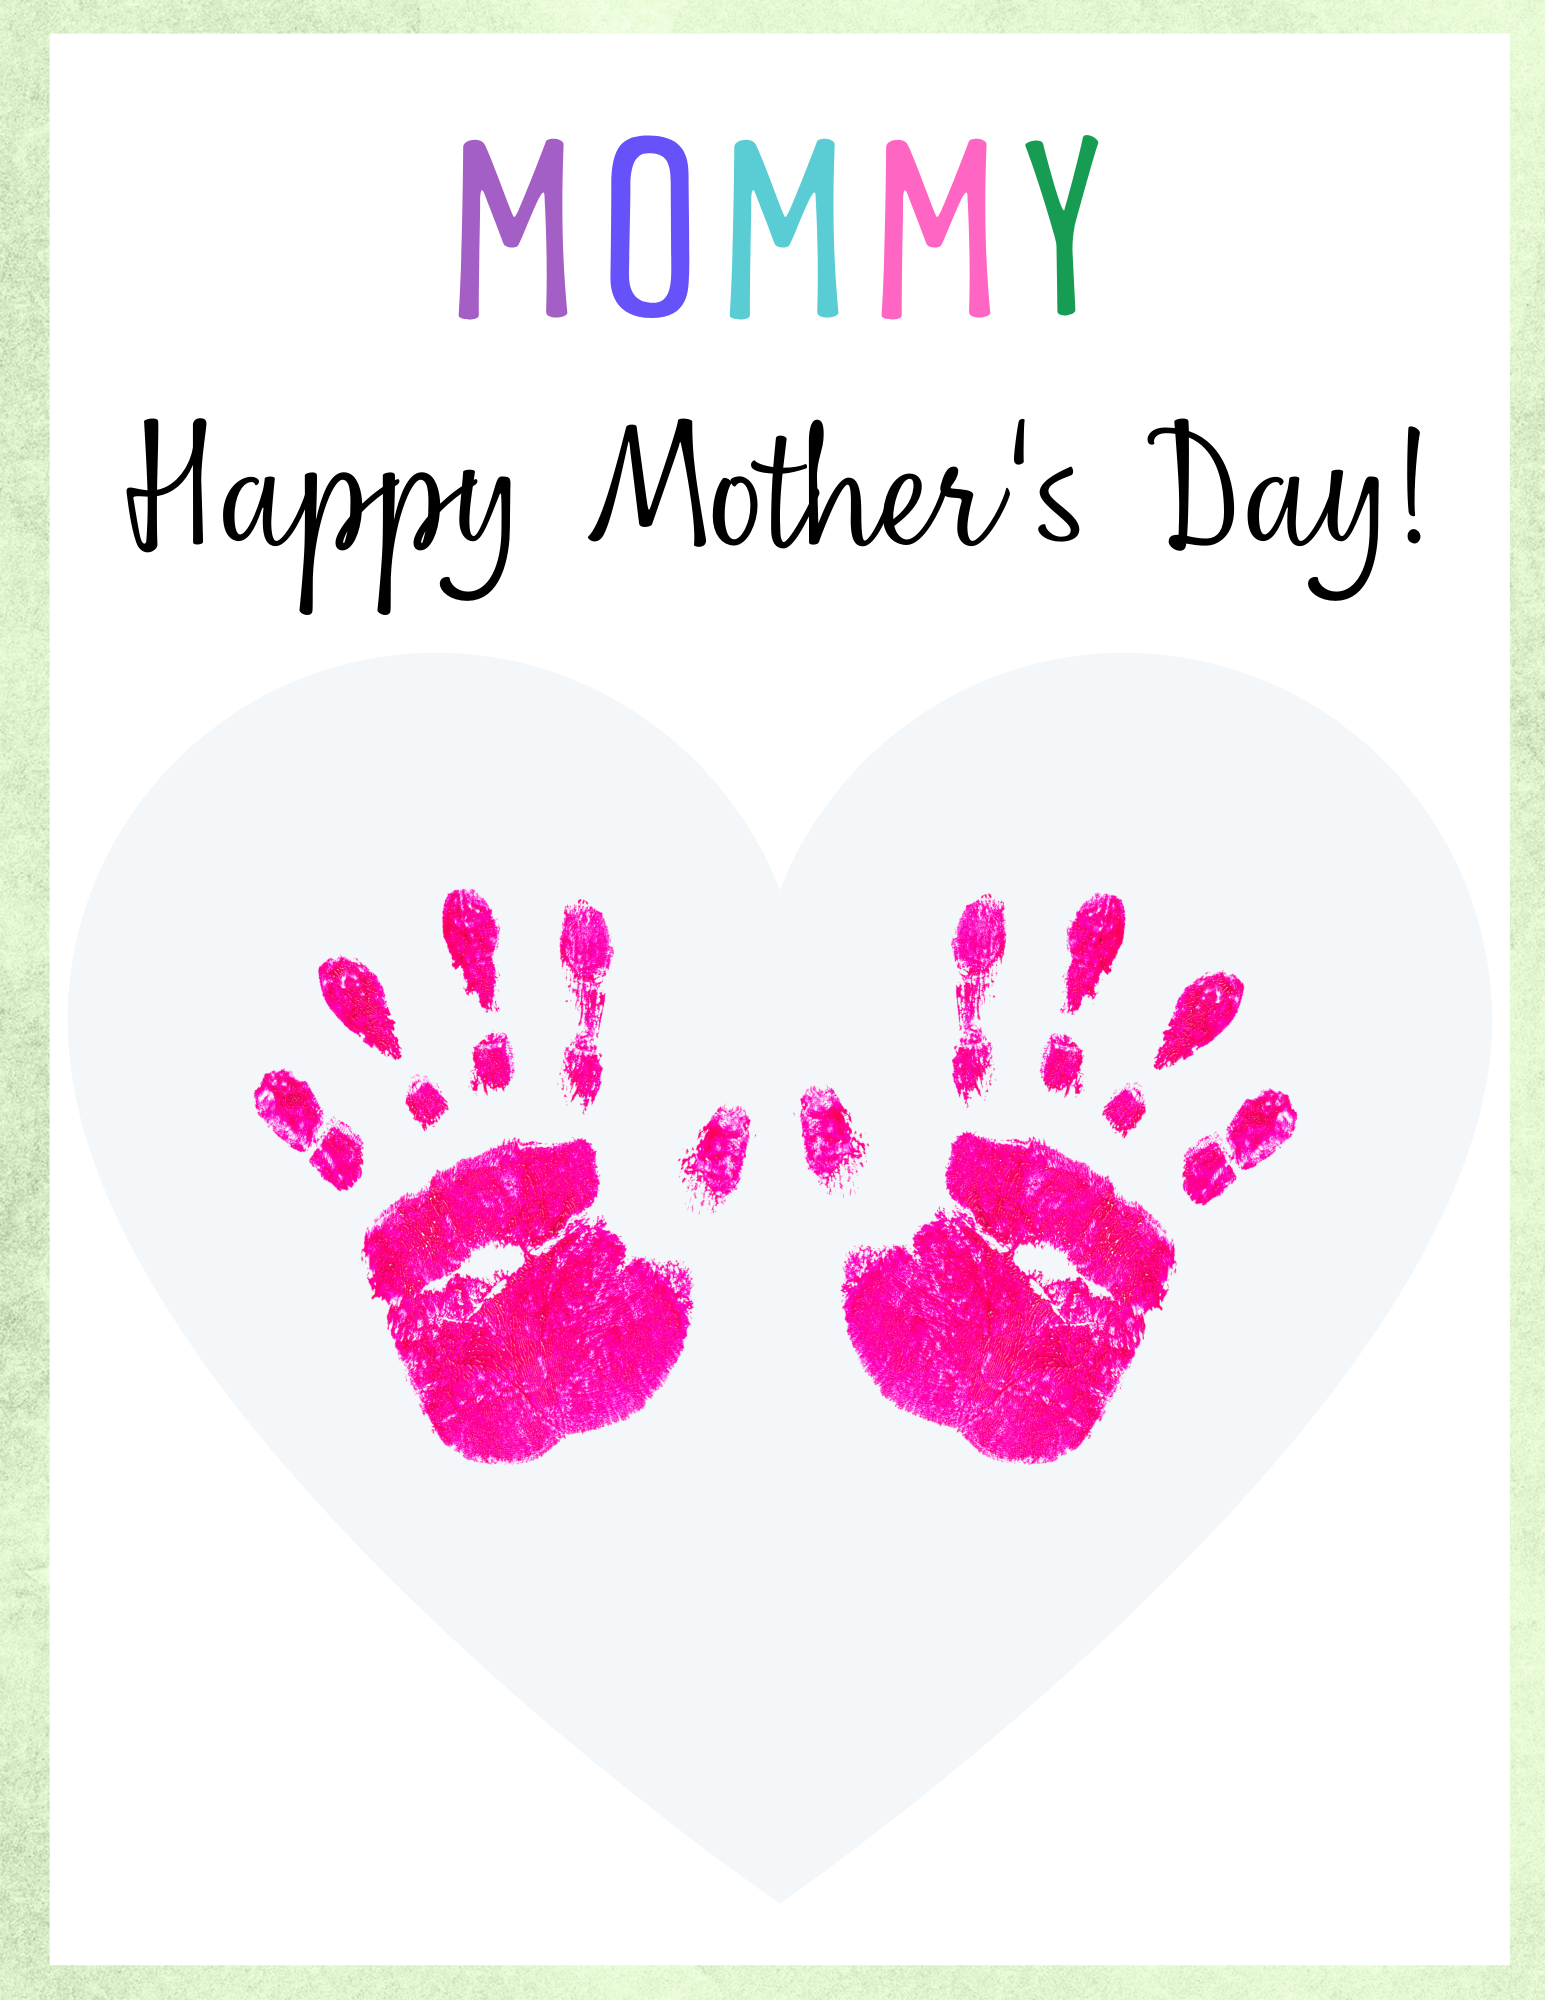 Mother’s Day Handprint Art: How to Make a Unique and Memorable Gift